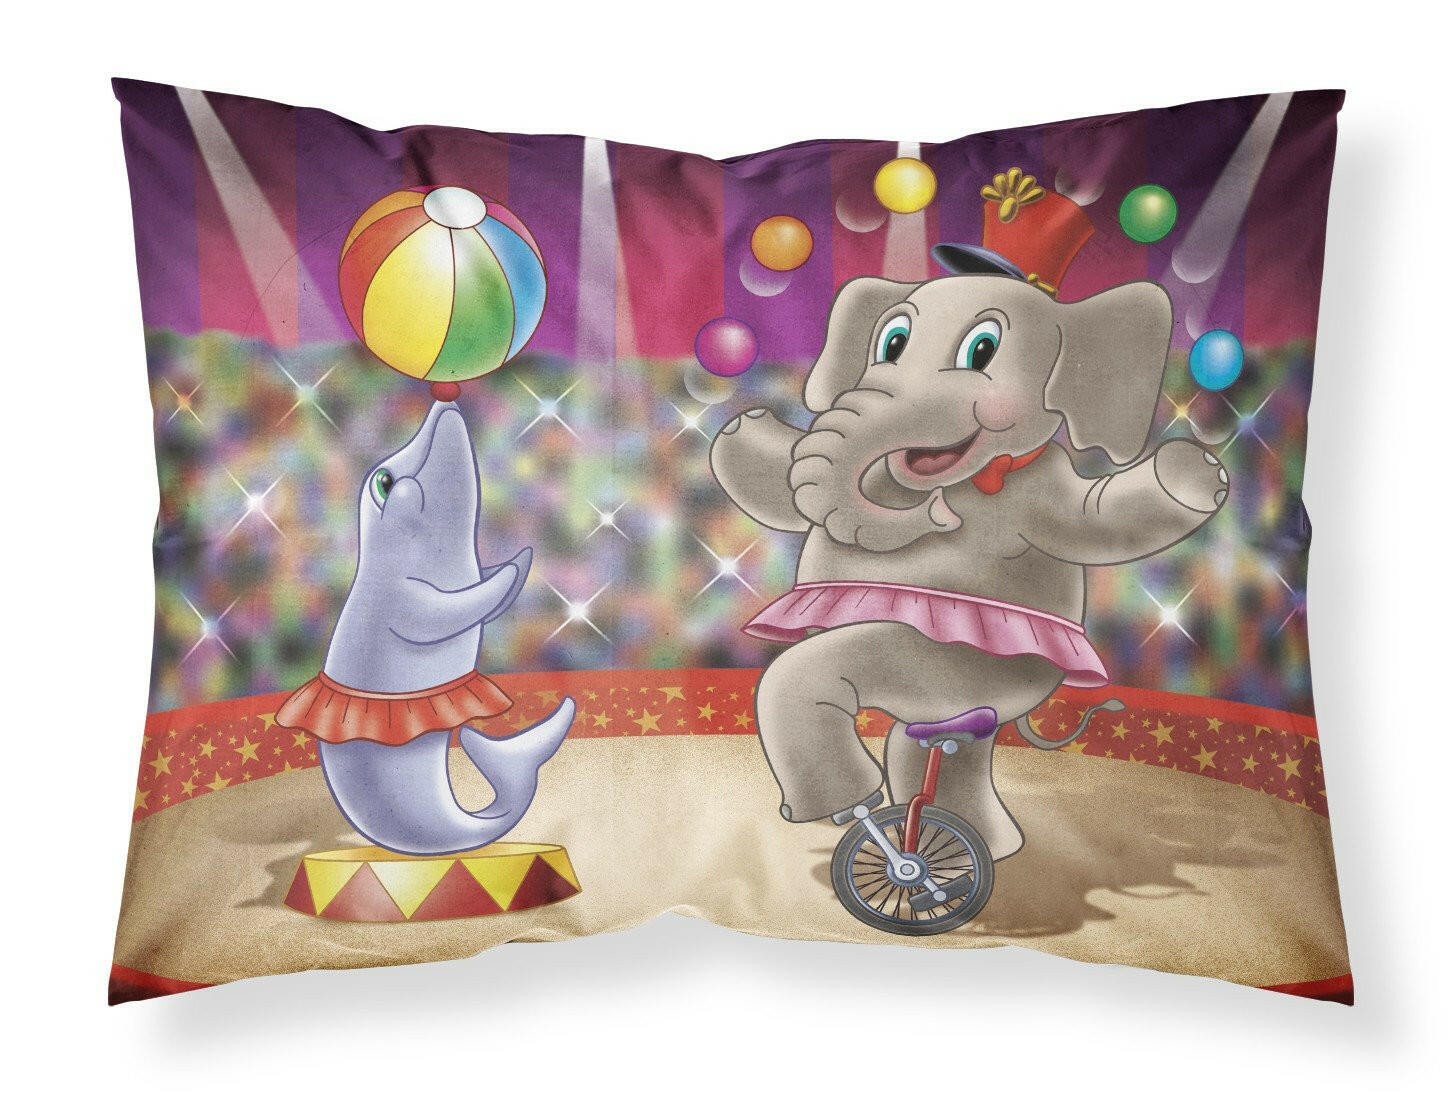 Circus Elephand and Dolphin Fabric Standard Pillowcase APH3816PILLOWCASE by Caroline's Treasures